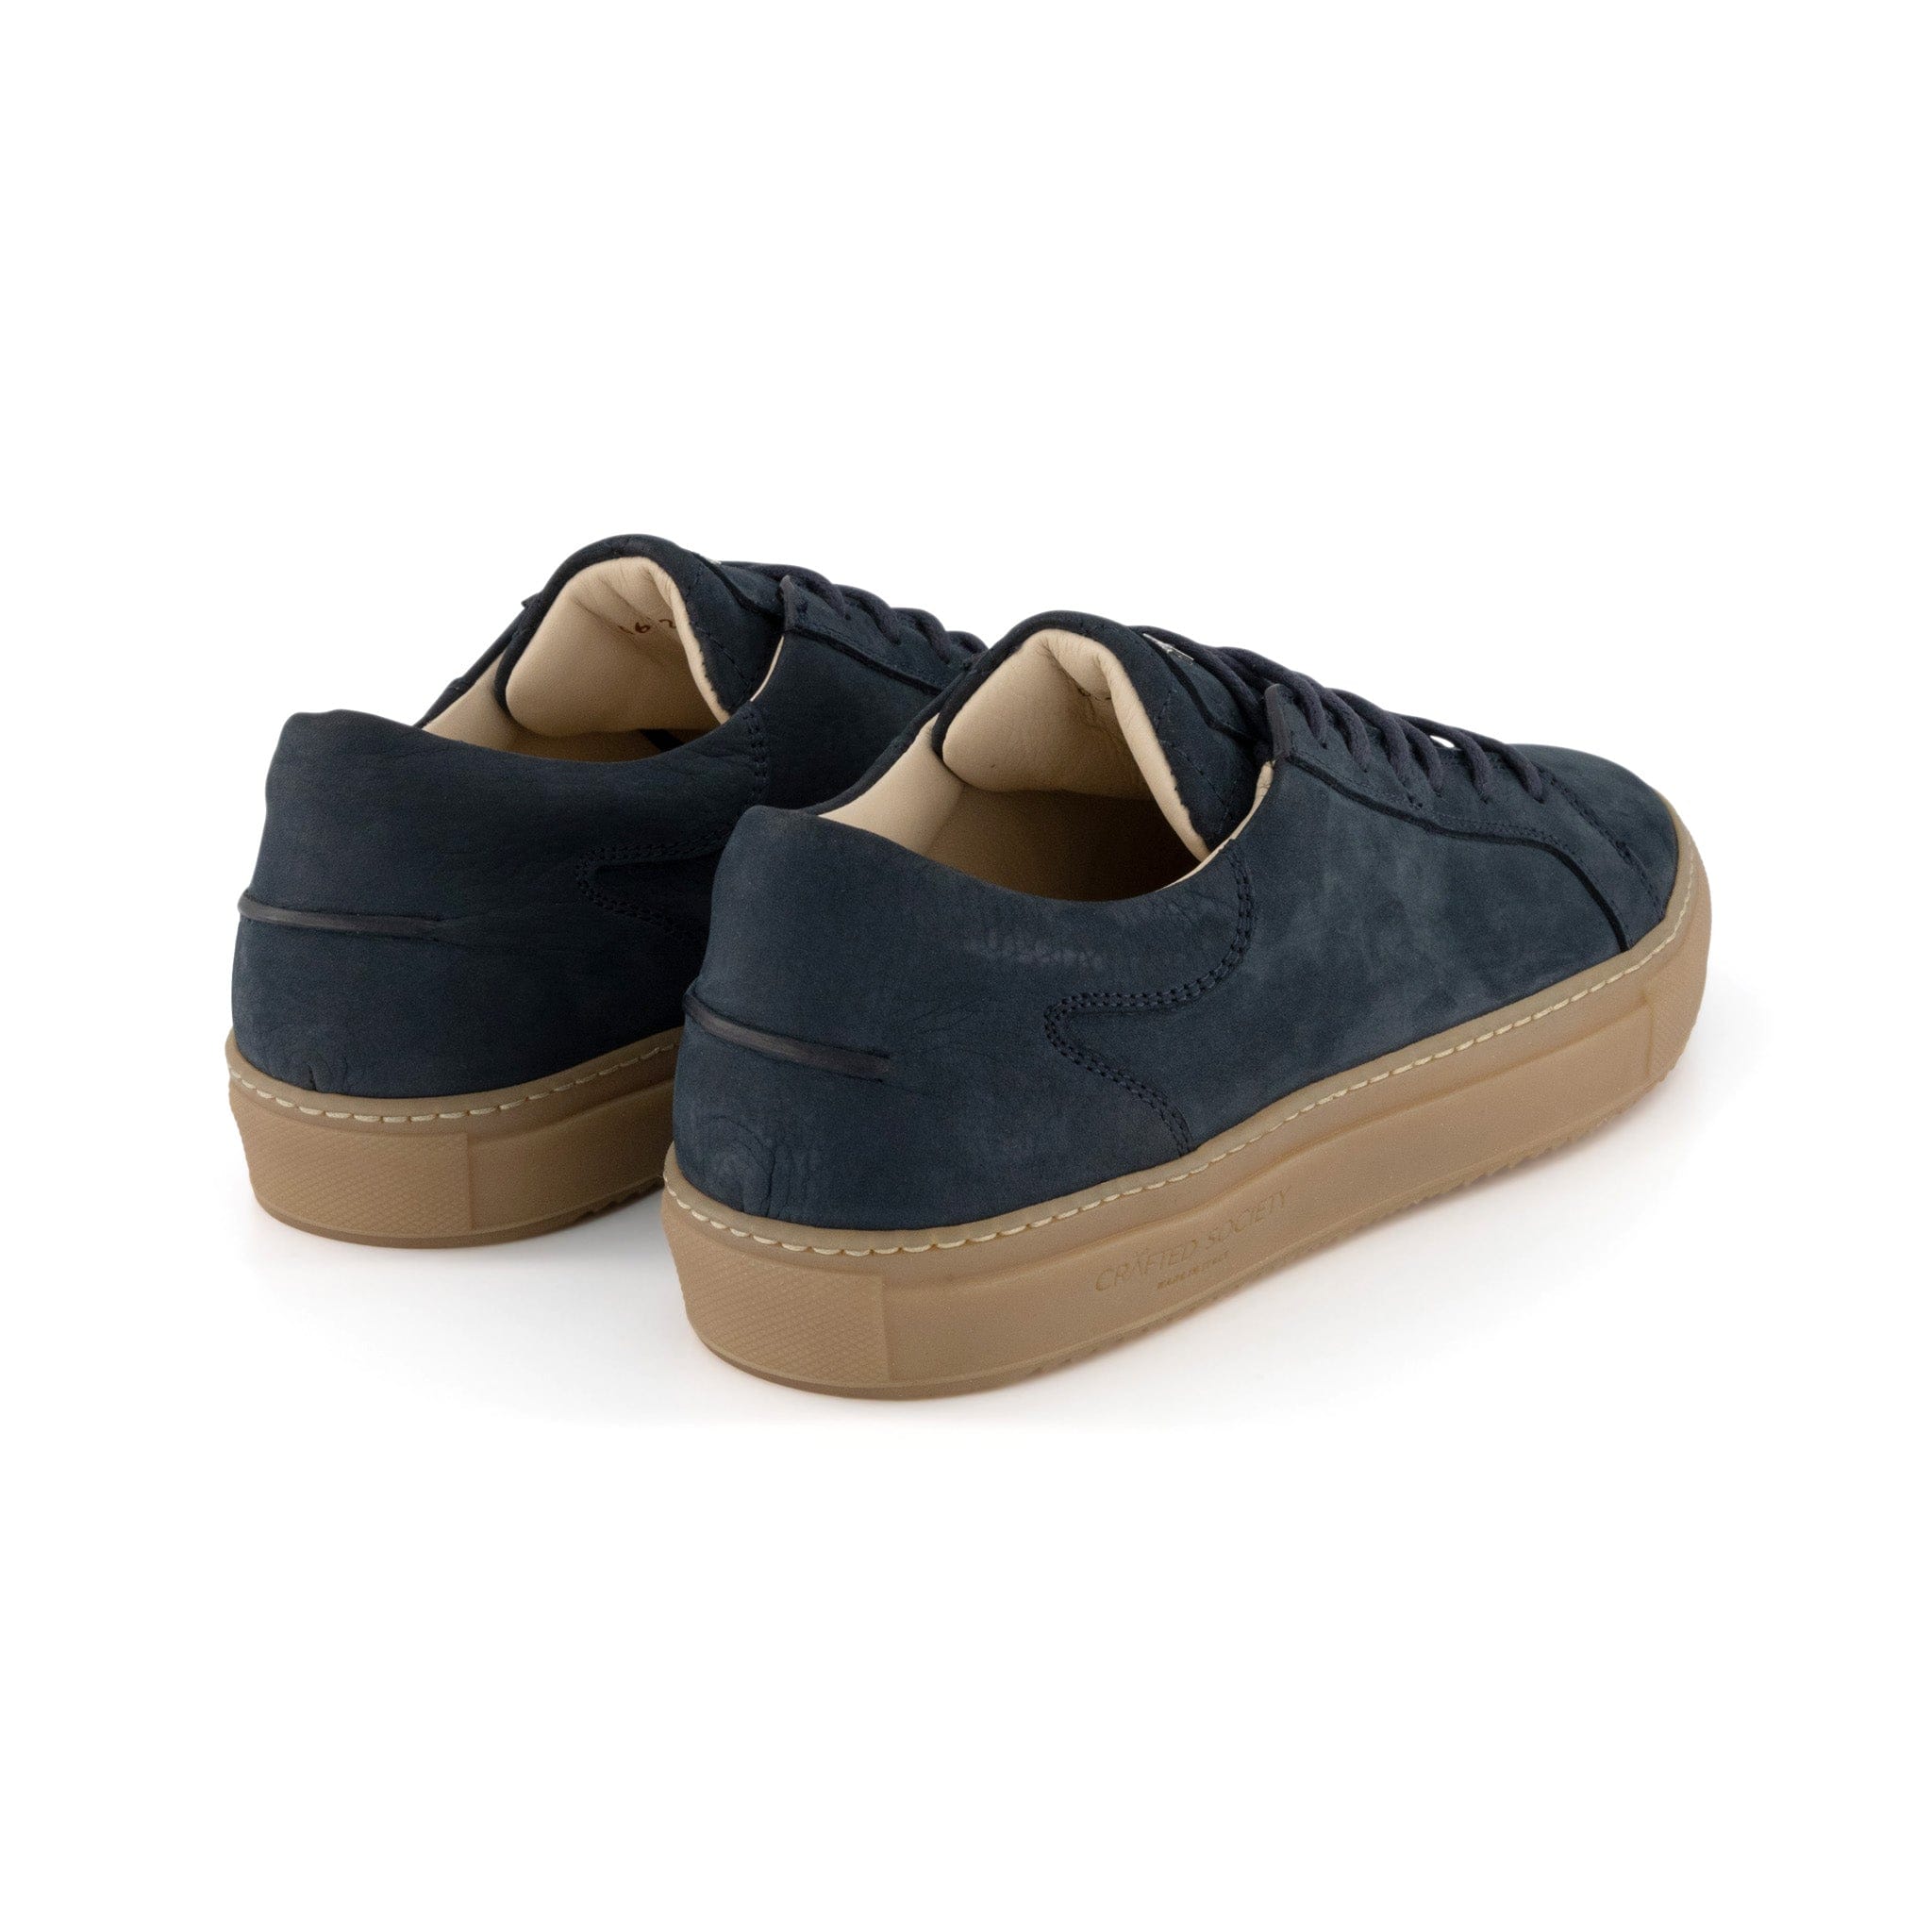 Mario Low Refined Sneaker | Navy Nubuck | Gum Rubber Outsole | Made in Italy